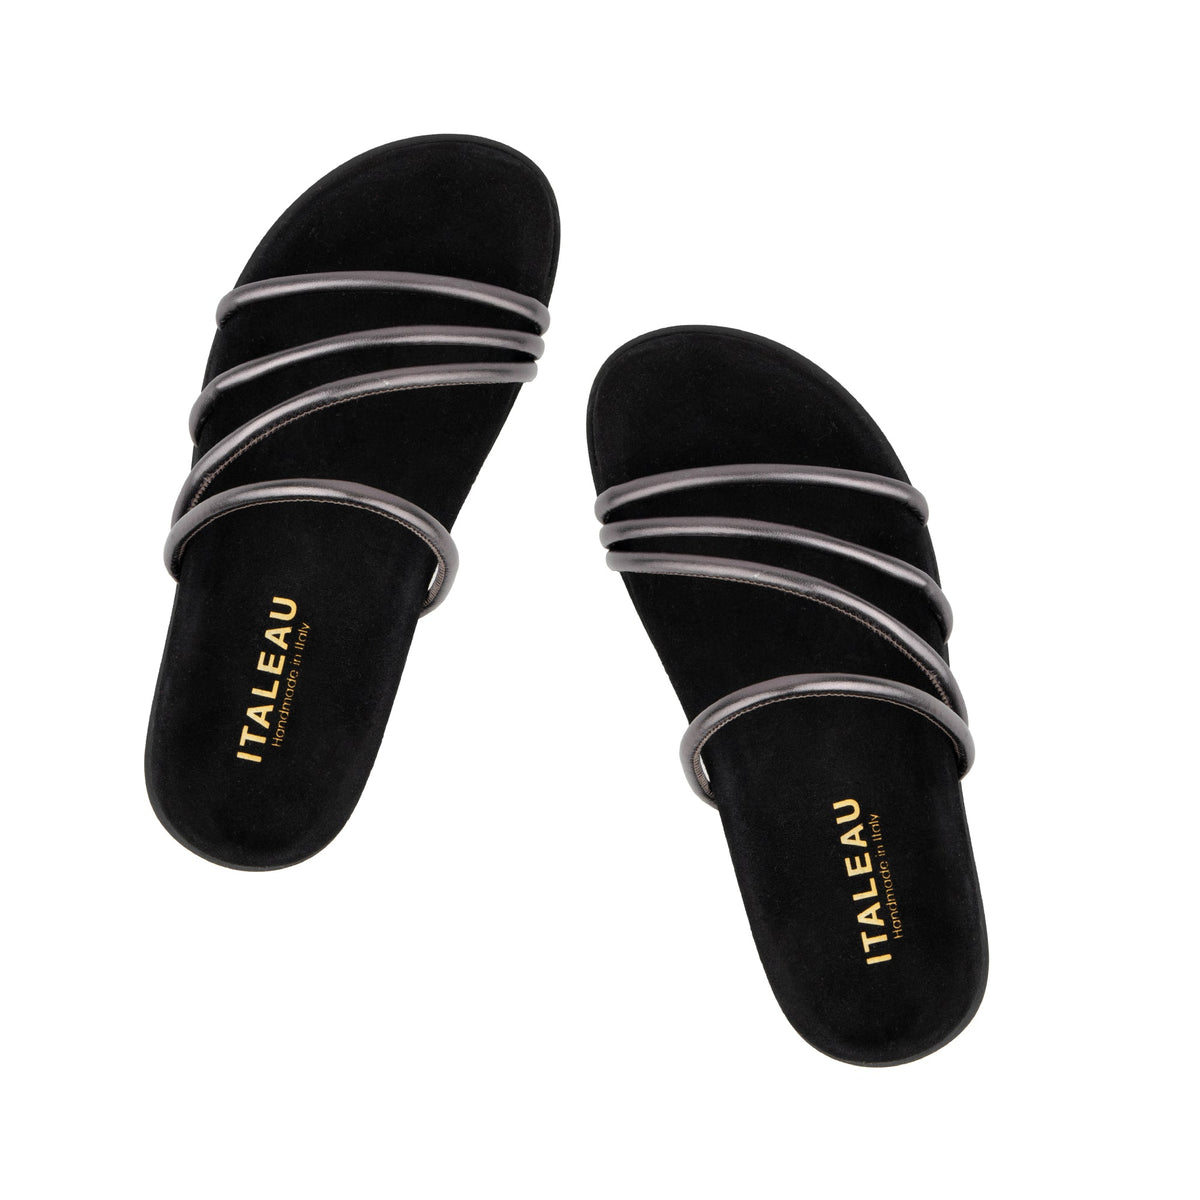 Italeau Milena slides are comfortable, stylish and handmade in Italy